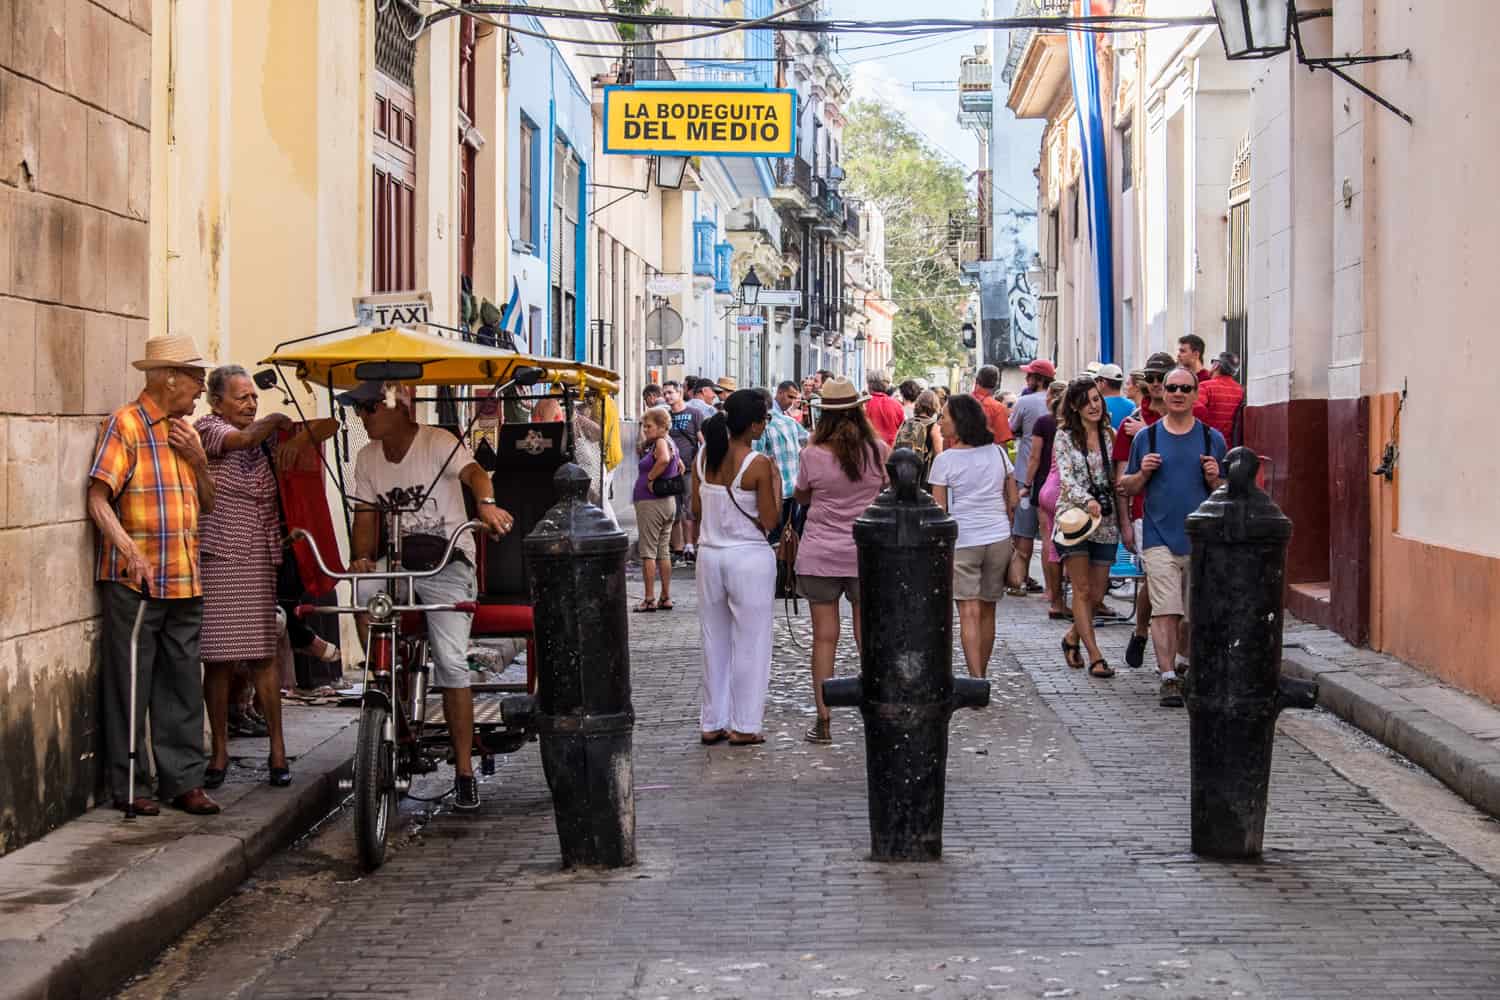 Cuba tourism in Havana on the street outside La Bodeguita Del Medio bar and its famed yellow sign. 